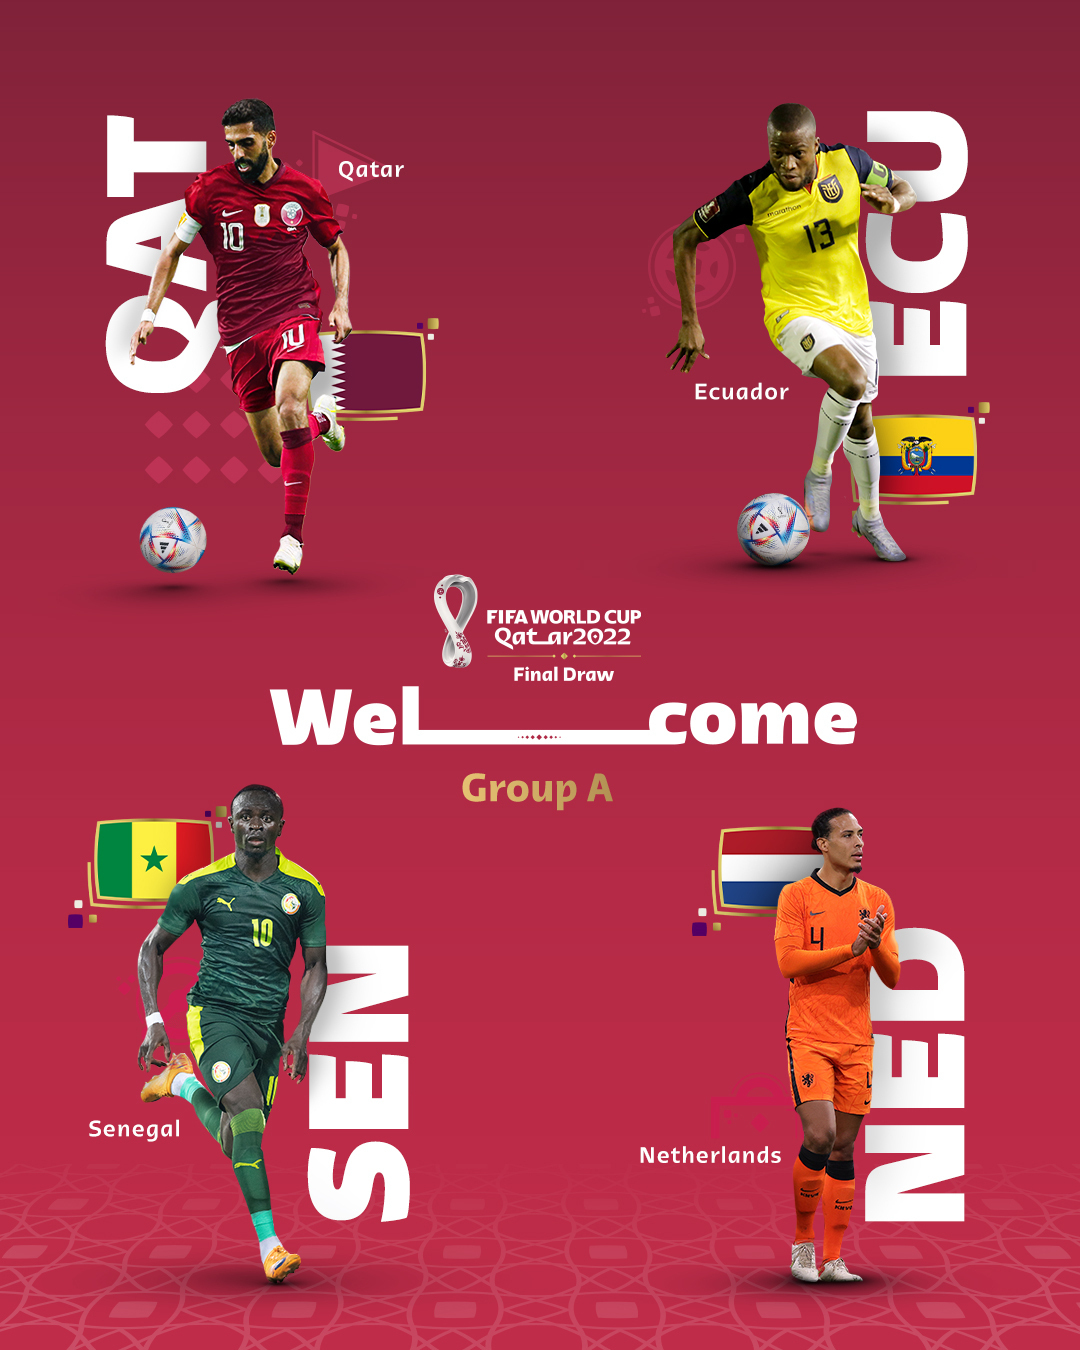 Fifa World Cup On Twitter 𝙄𝙣𝙩𝙧𝙤𝙙𝙪𝙘𝙞𝙣𝙜 𝙂𝙧𝙤𝙪𝙥 𝘼 Will The Hosts Reach The Knockouts In Their